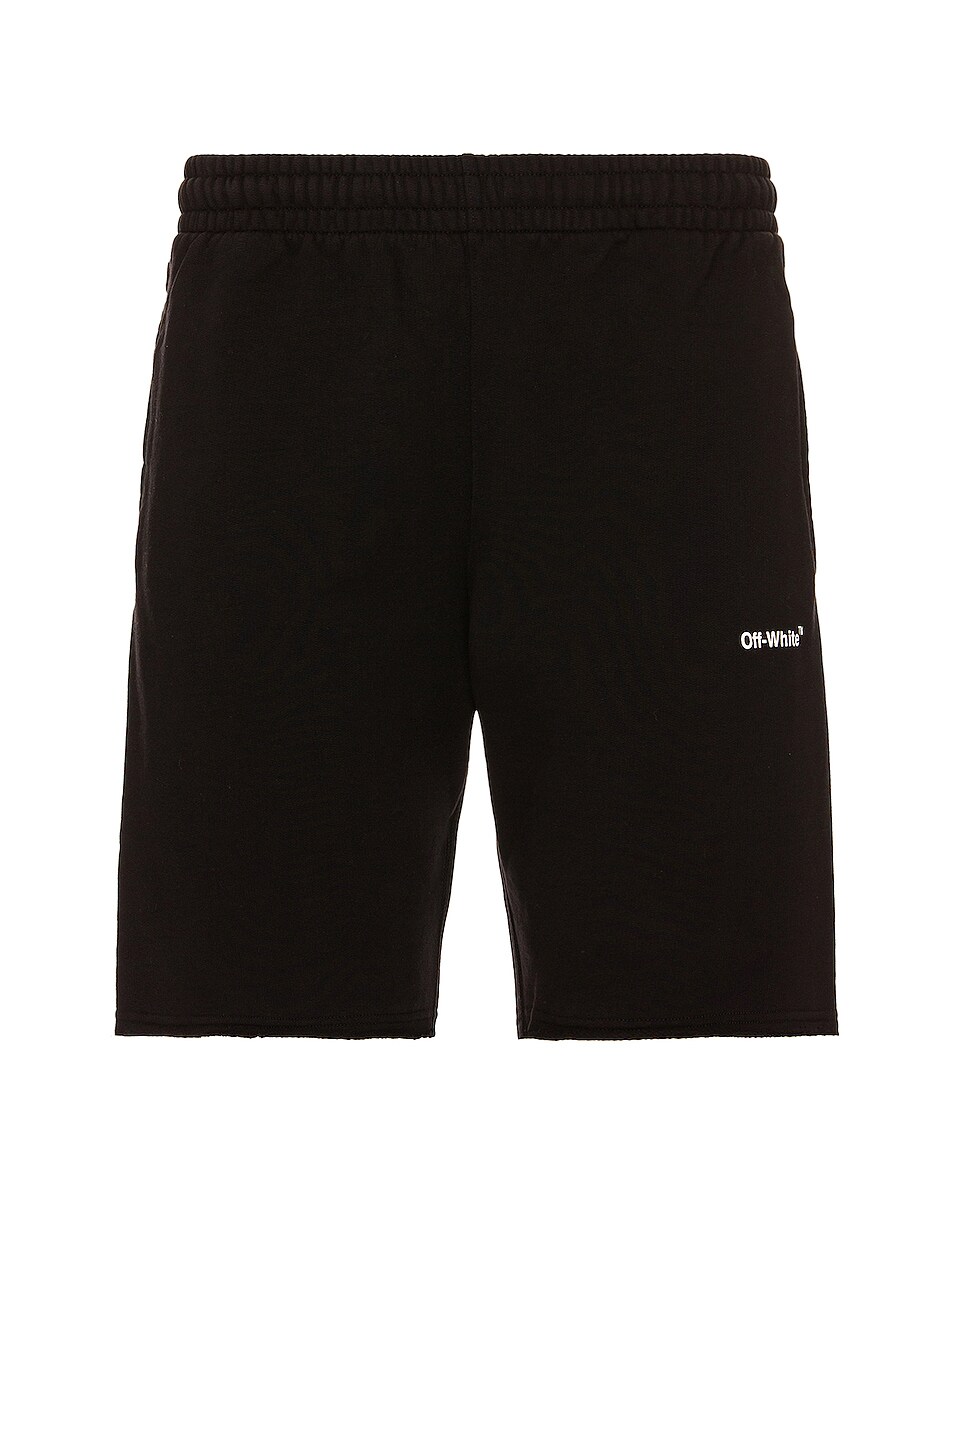 Image 1 of OFF-WHITE Diagonal Helvetica Sweat Shorts in Black